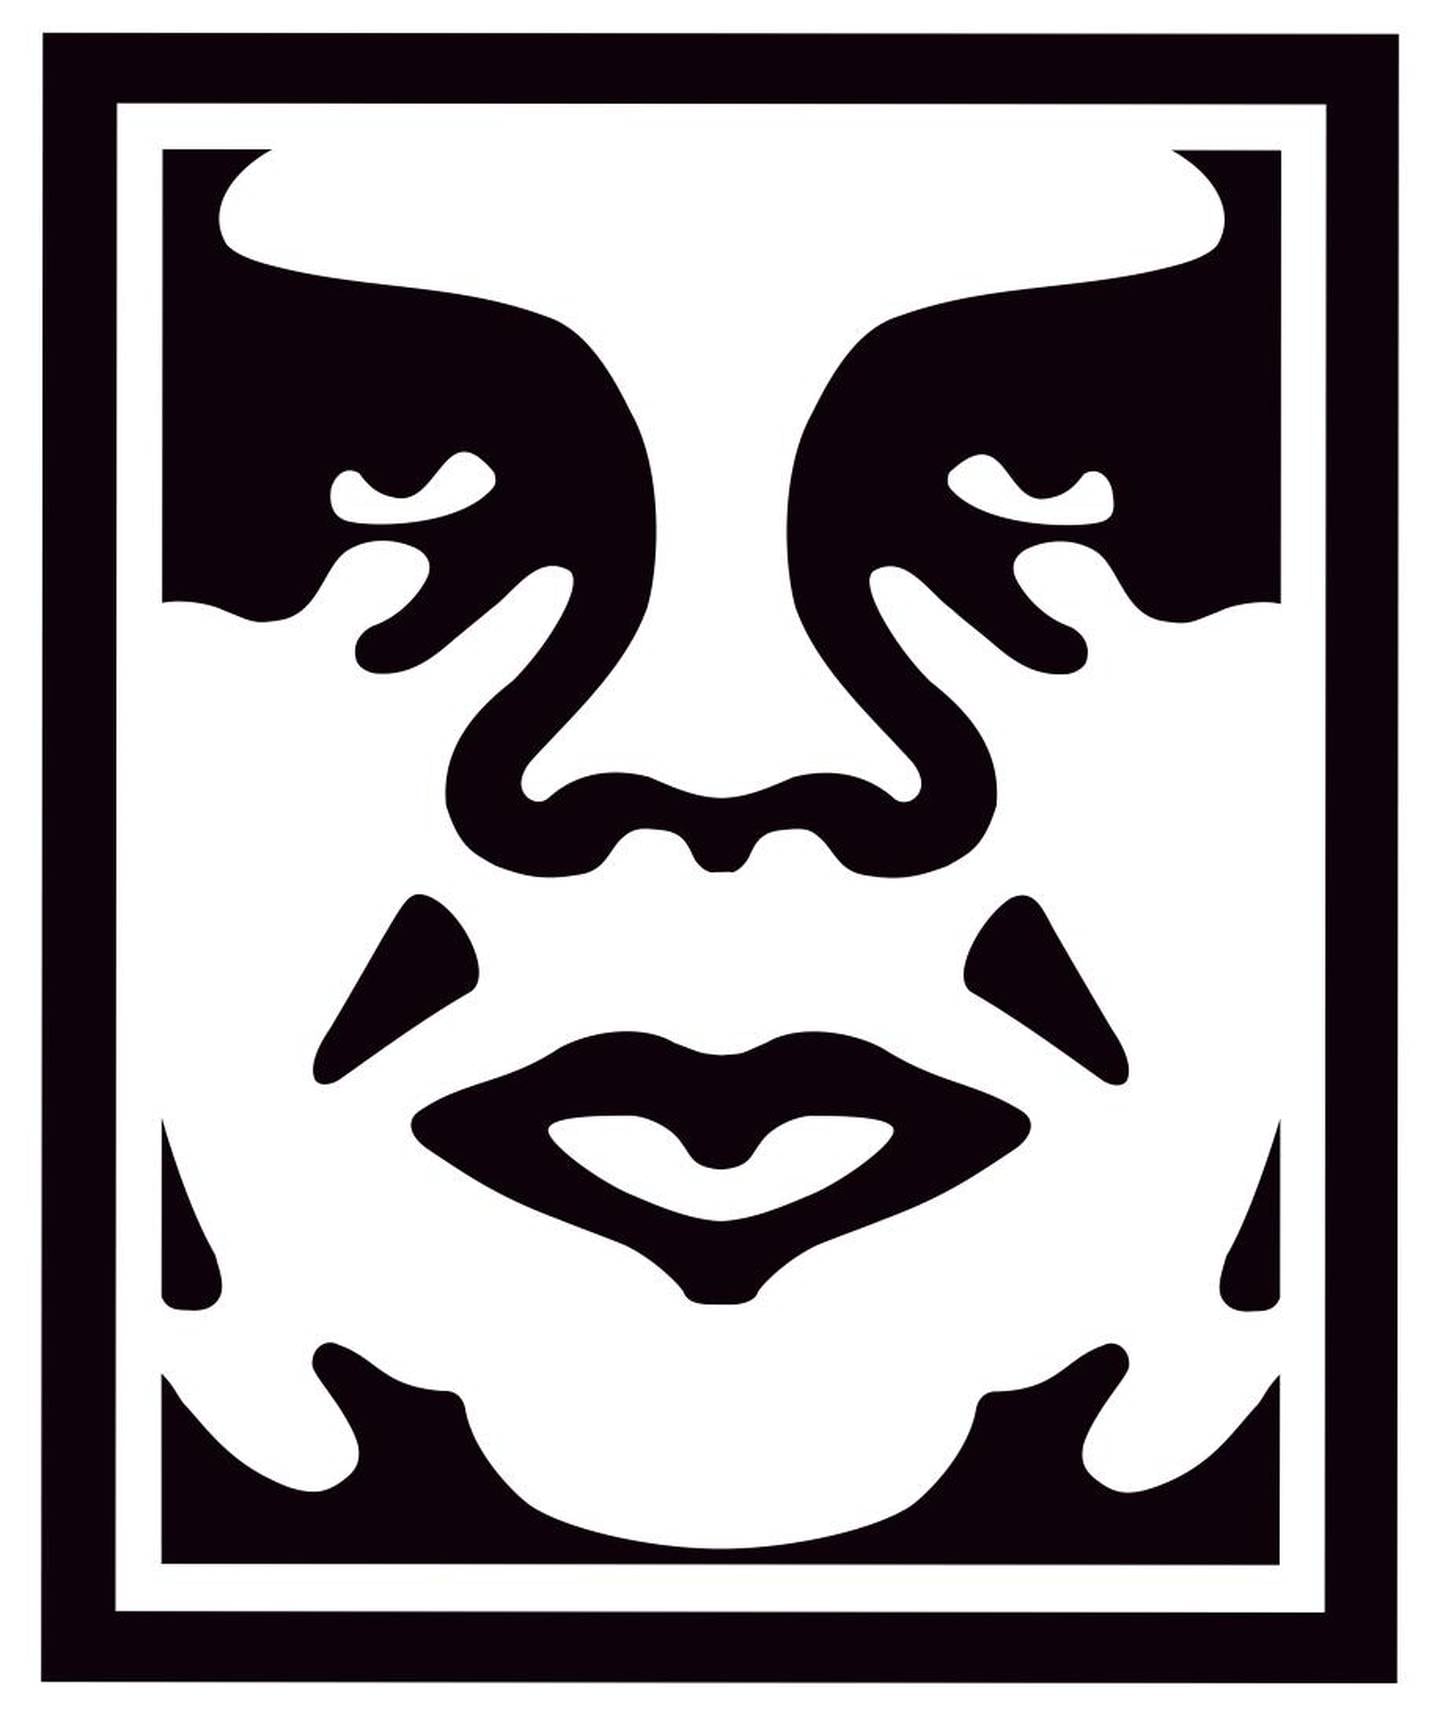 'Andre the Giant Has a Posse', which later became known simply as 'Obey', by Shepard Fairey. Courtesy Opera Gallery